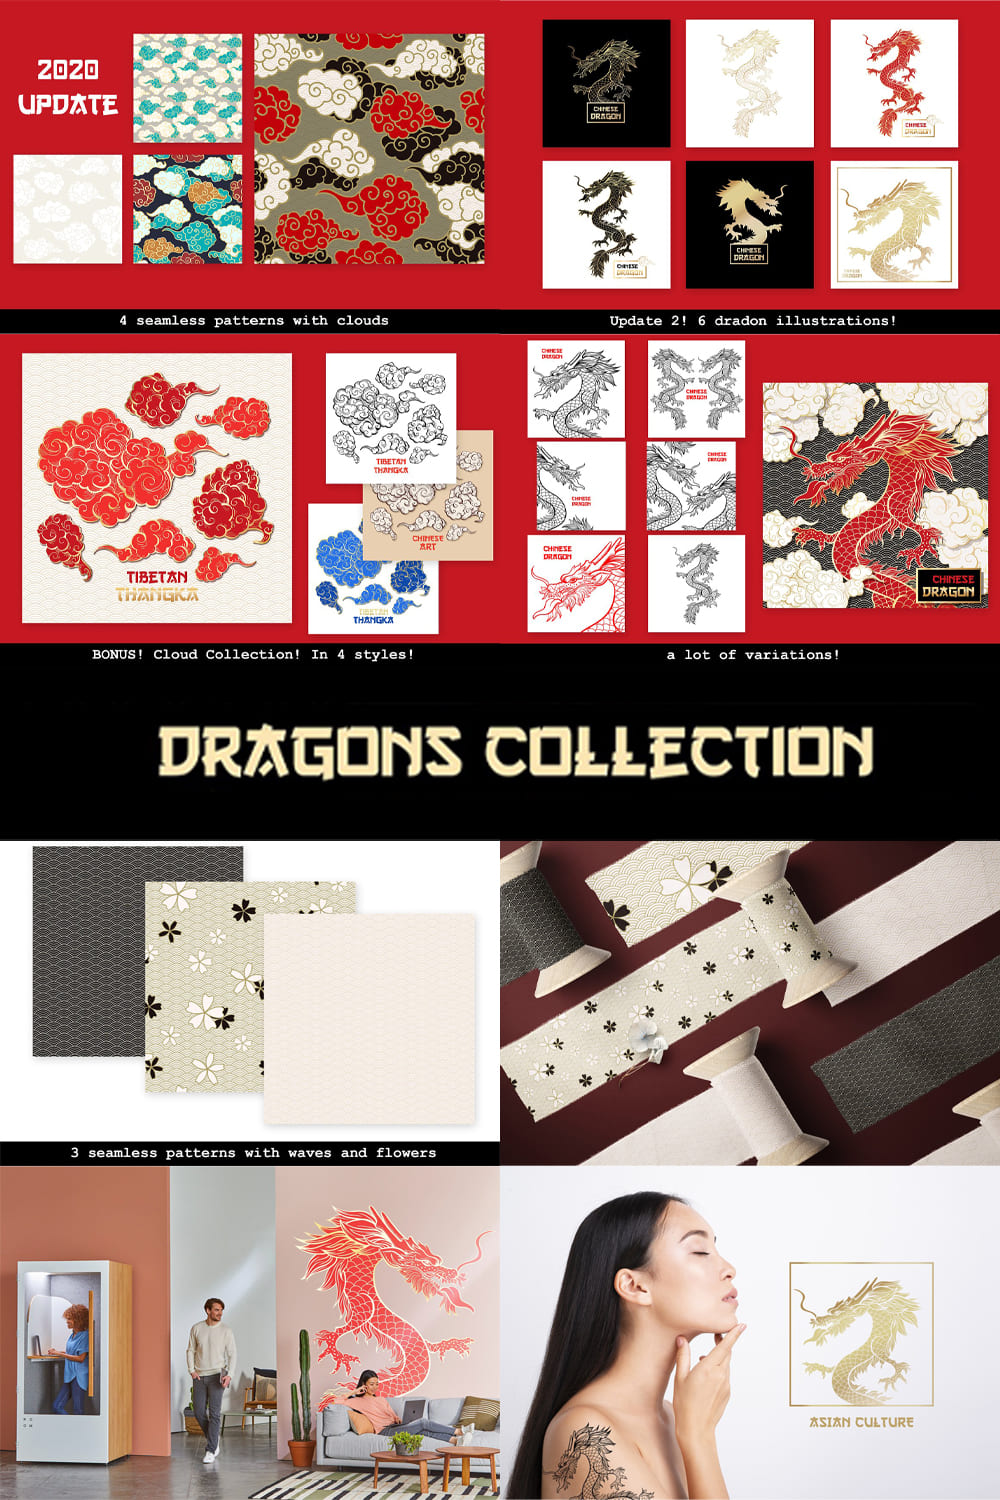 Chinese dragon vector illustrations - pinterest image preview.